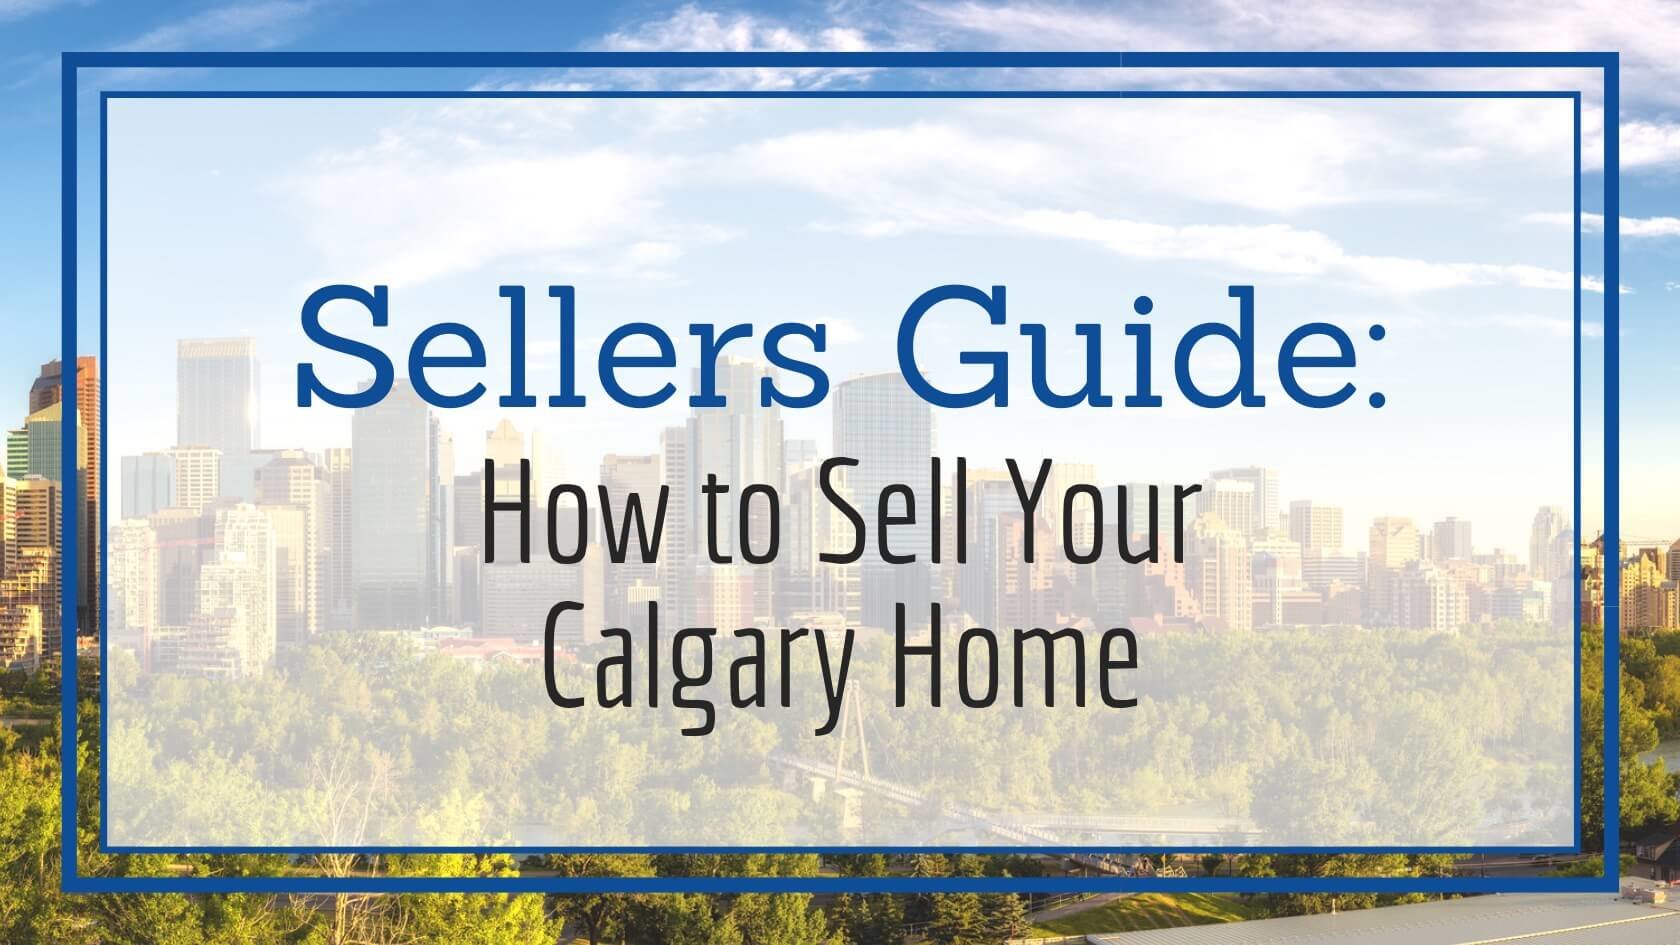 How to Sell Your Calgary Home